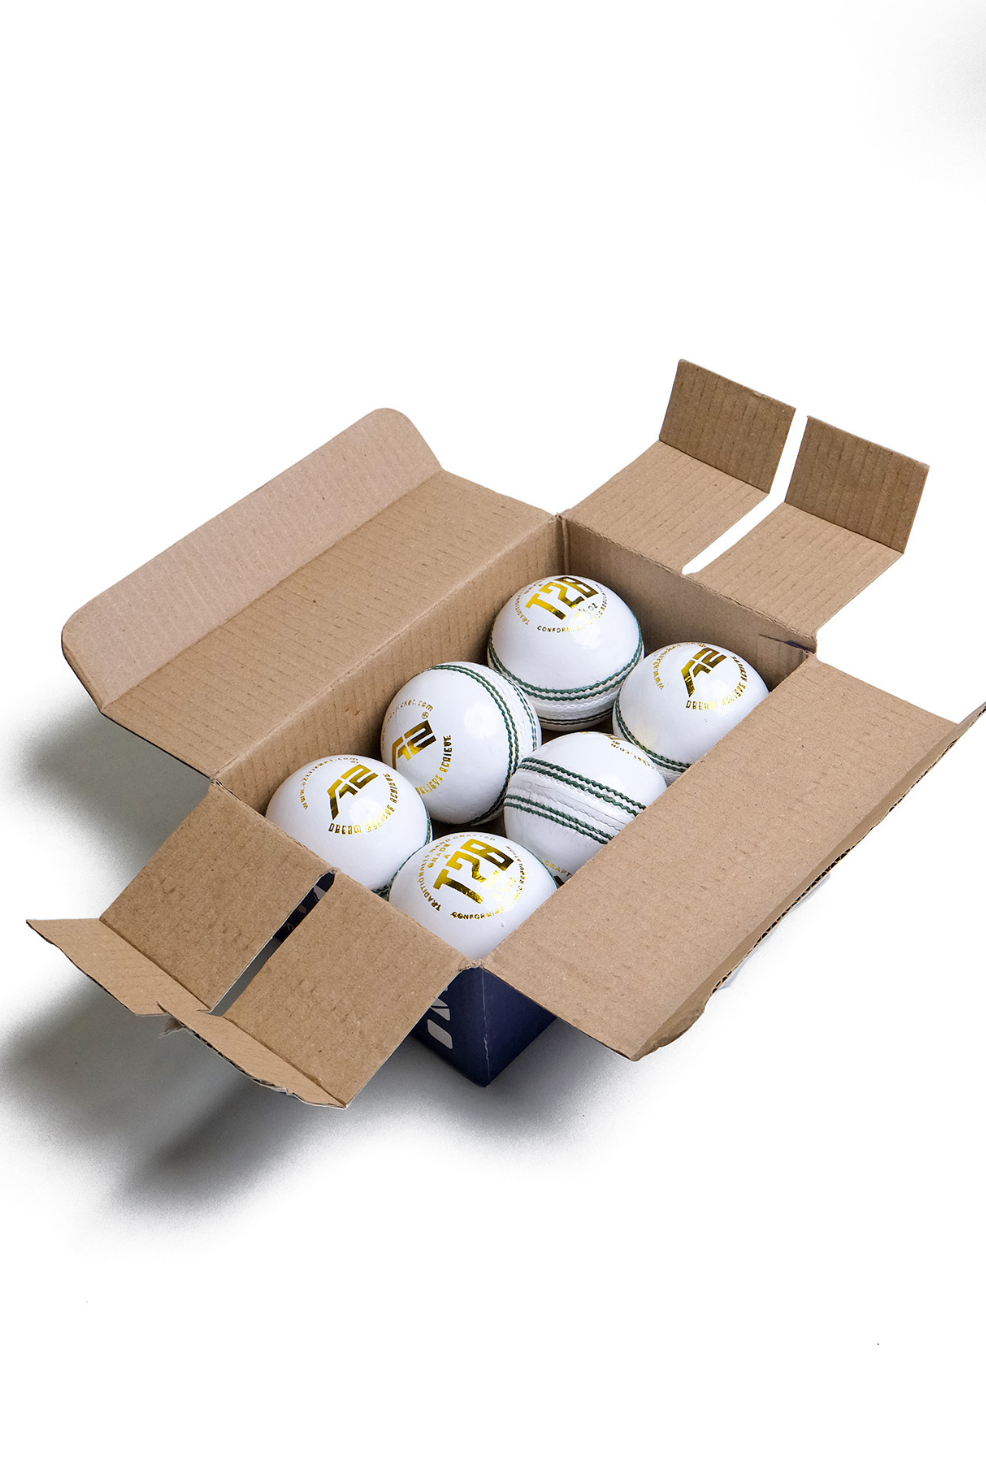 4 Piece Leather Cricket Ball - T20 White (Box of 6 balls)